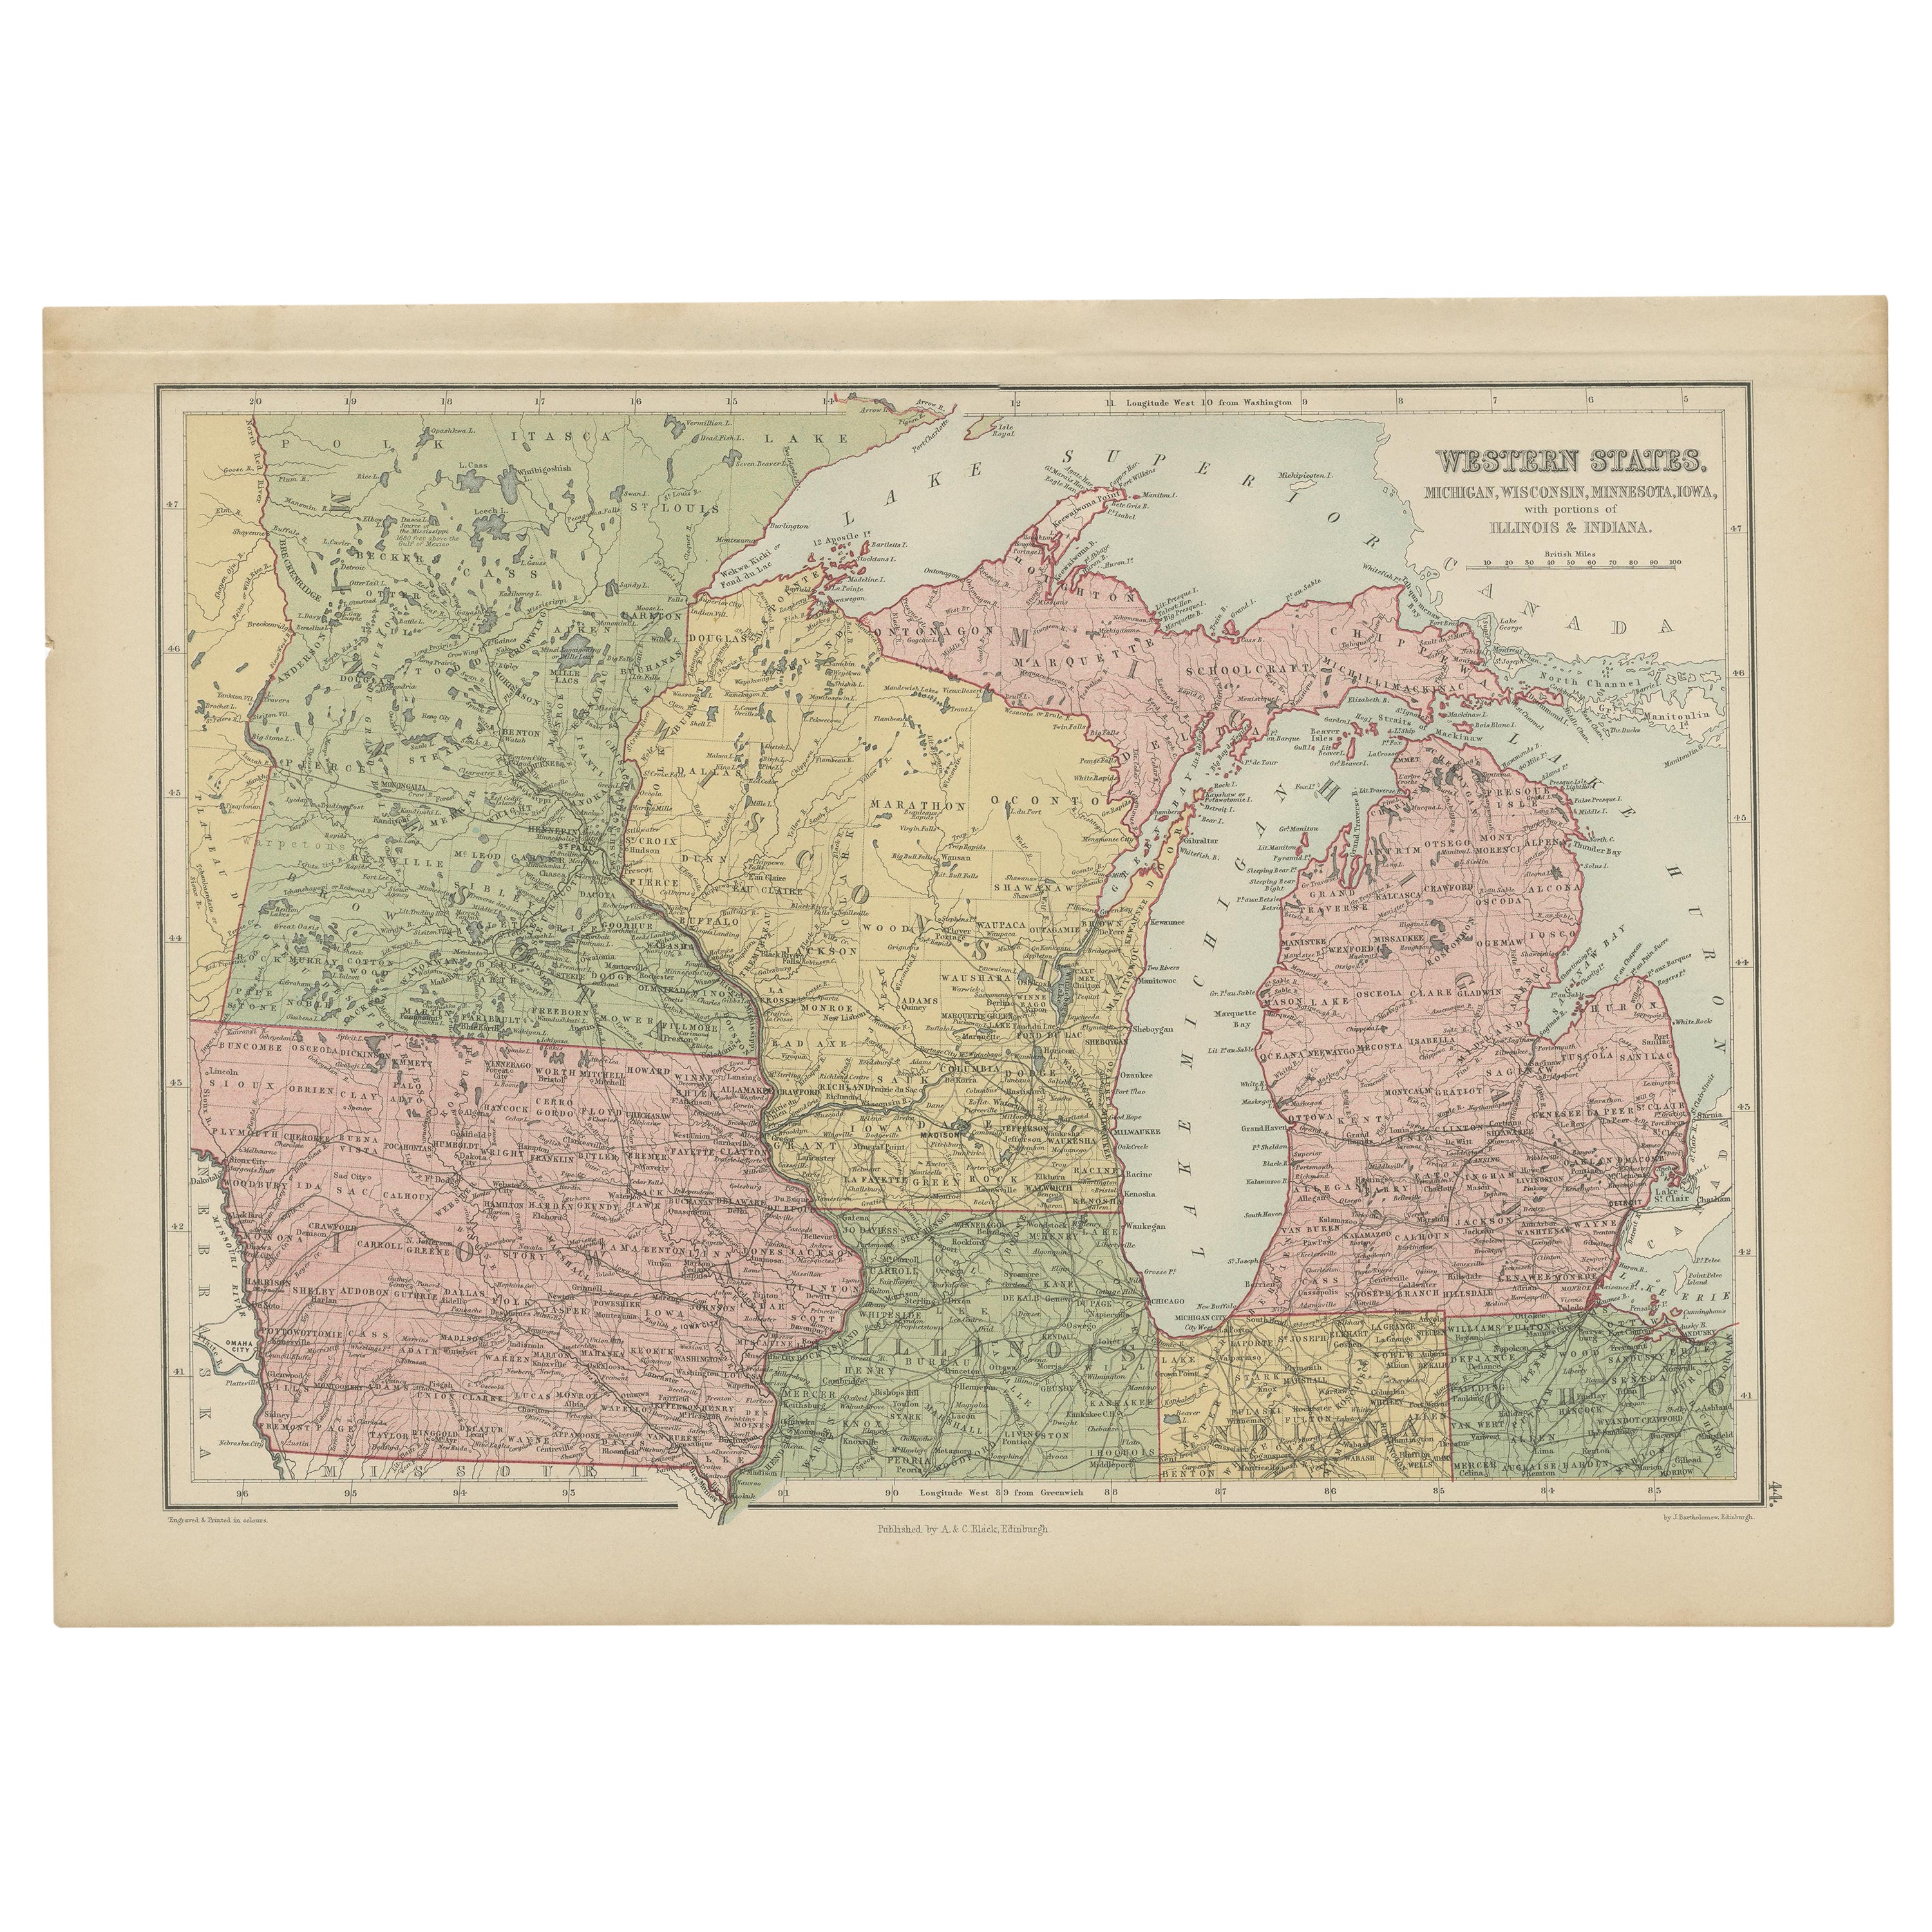 Antique Map of Western States, Michigan, Wisconsin, Iowa by A & C. Black, 1870